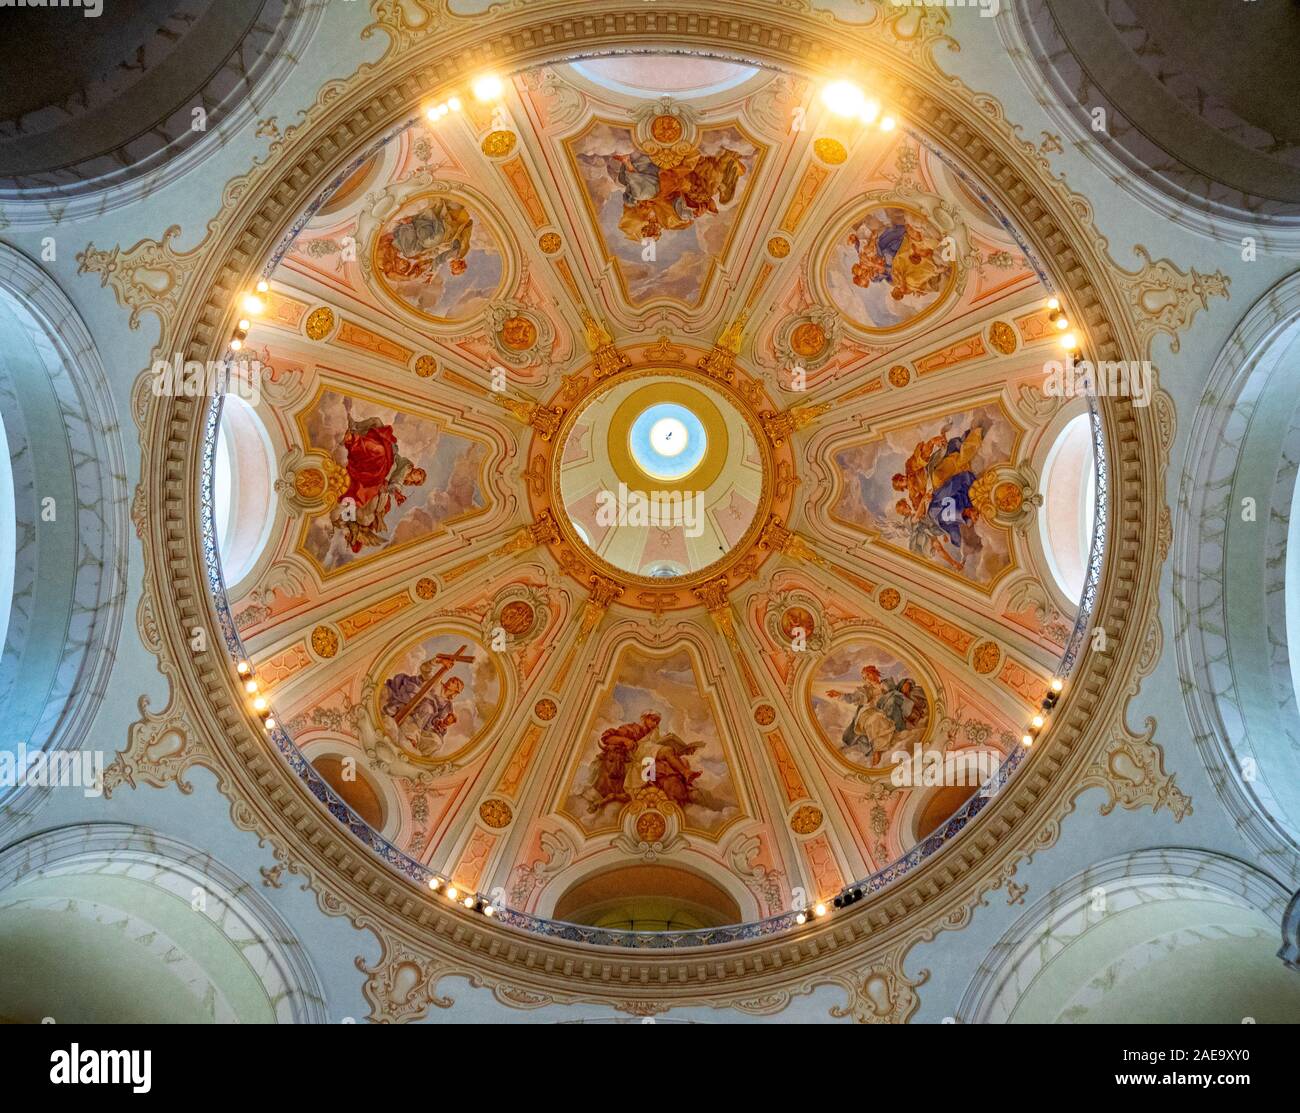 Painted ceiling dome Frauenkirche Church of Our Lady Platz Neumarkt Newmarket Altstadt Dresden Saxony Germany. Stock Photo